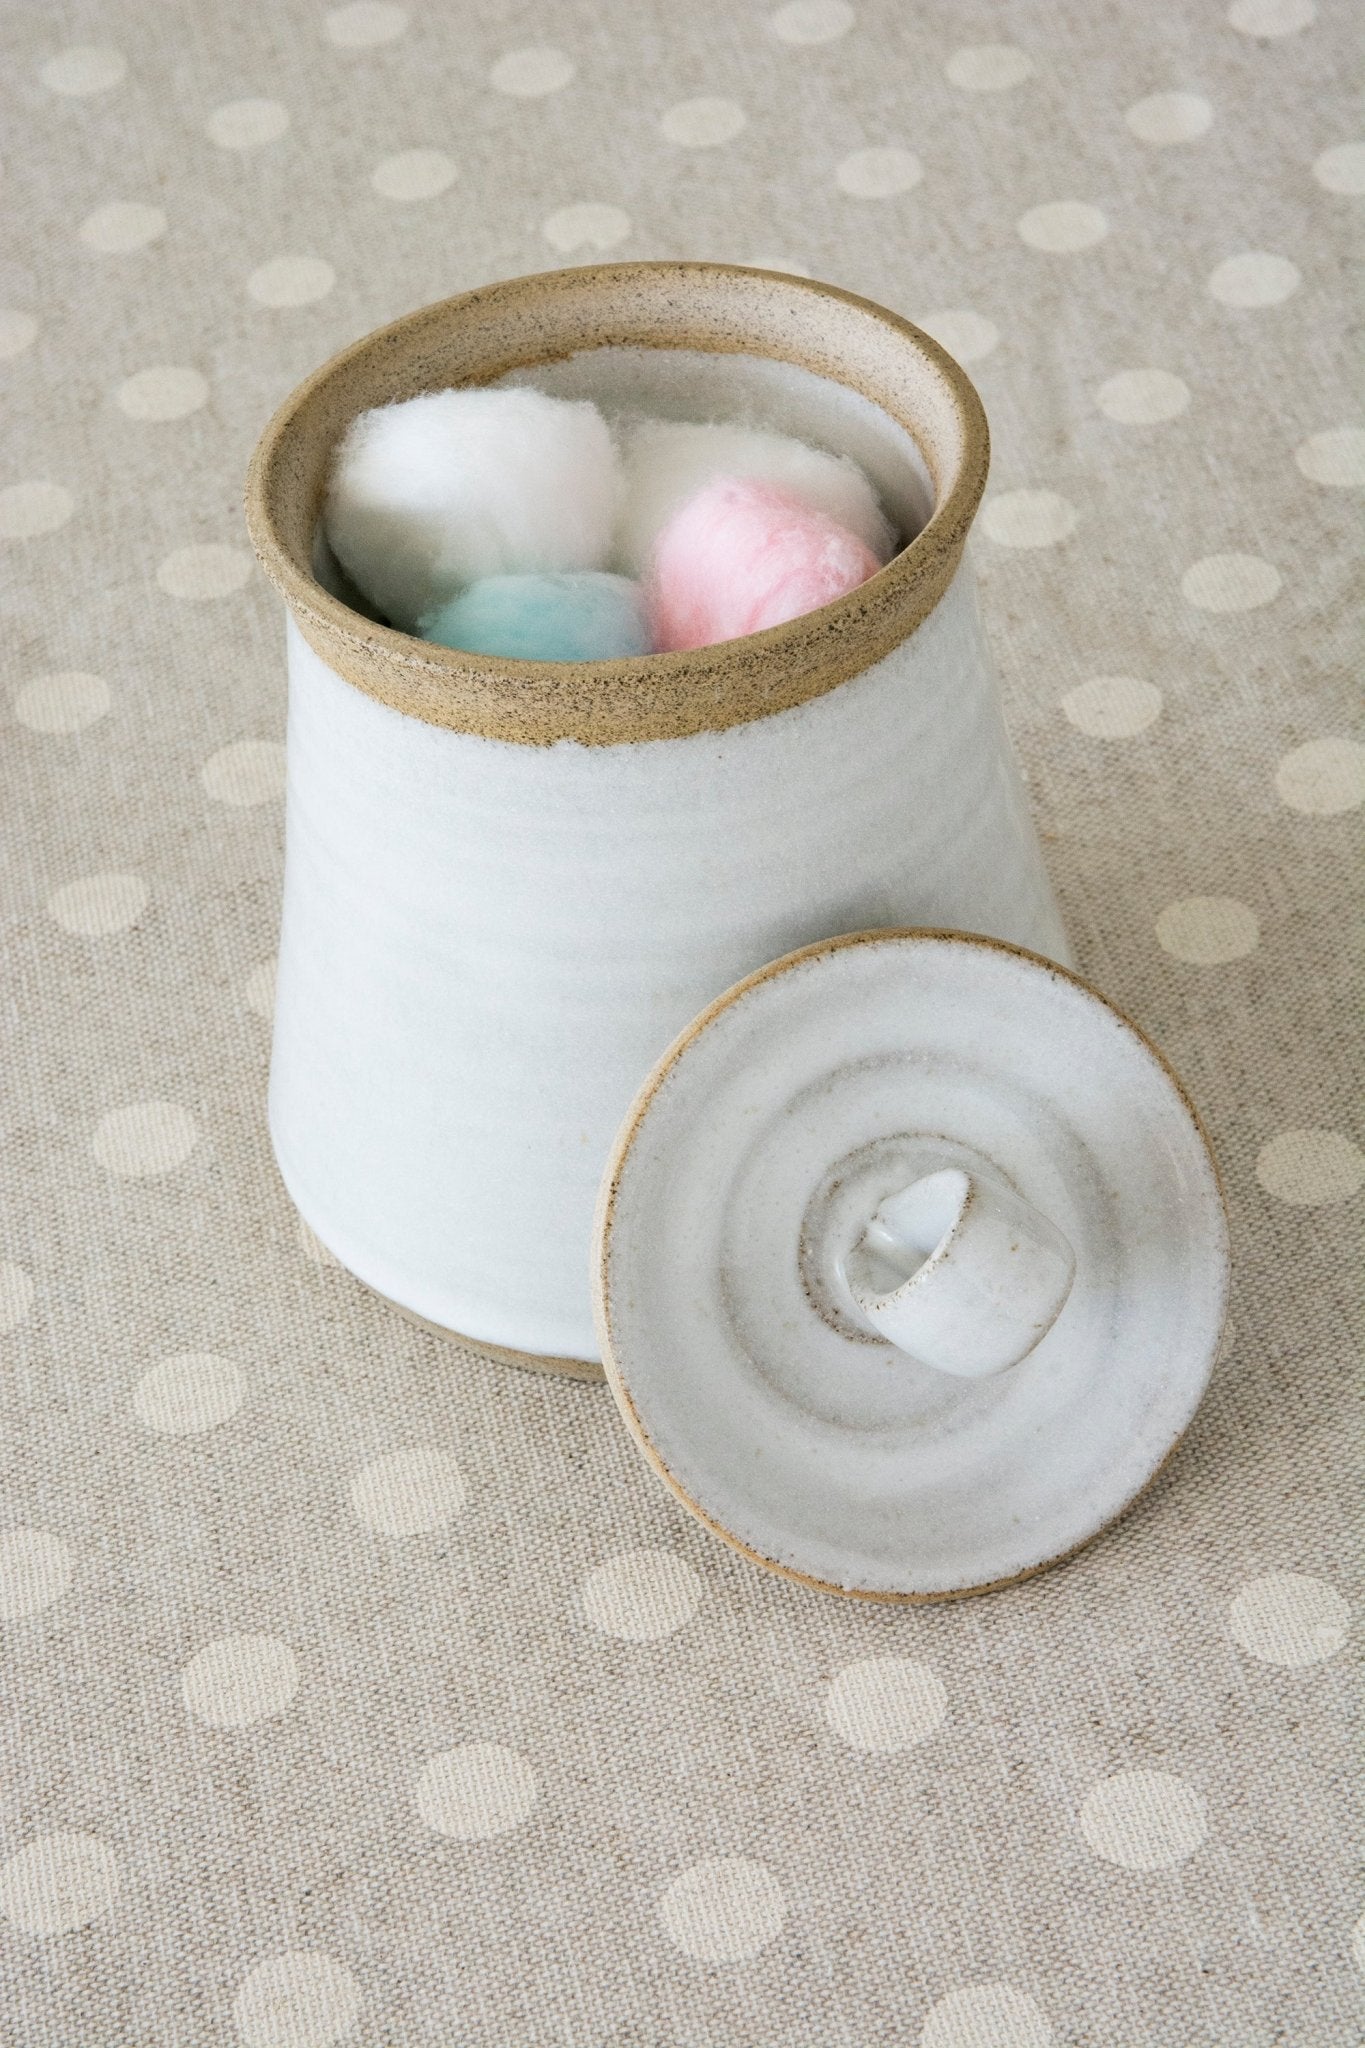 Cotton Swab Storage Jar or Container - Mad About Pottery- canister